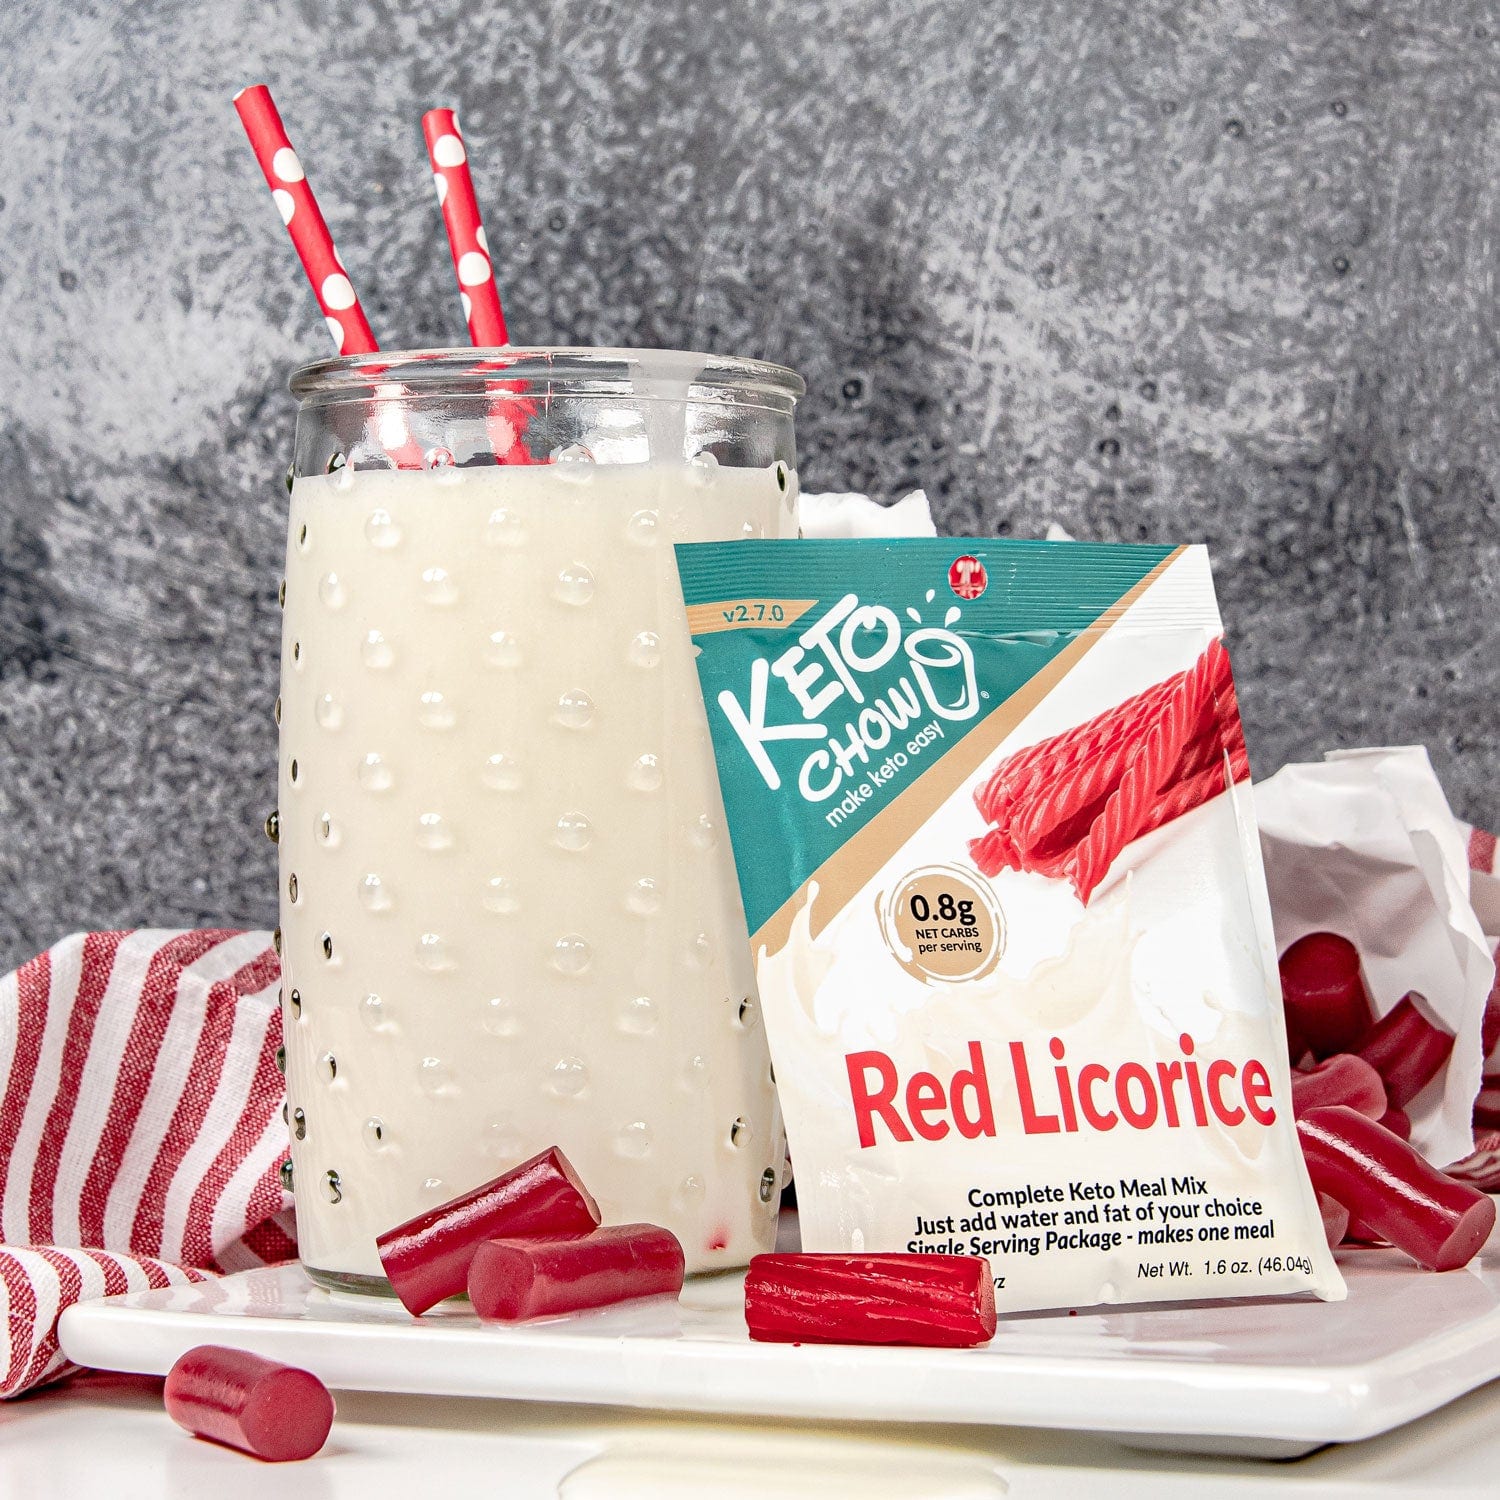 Red Licorice Keto Chow Single Meal Packet and shake